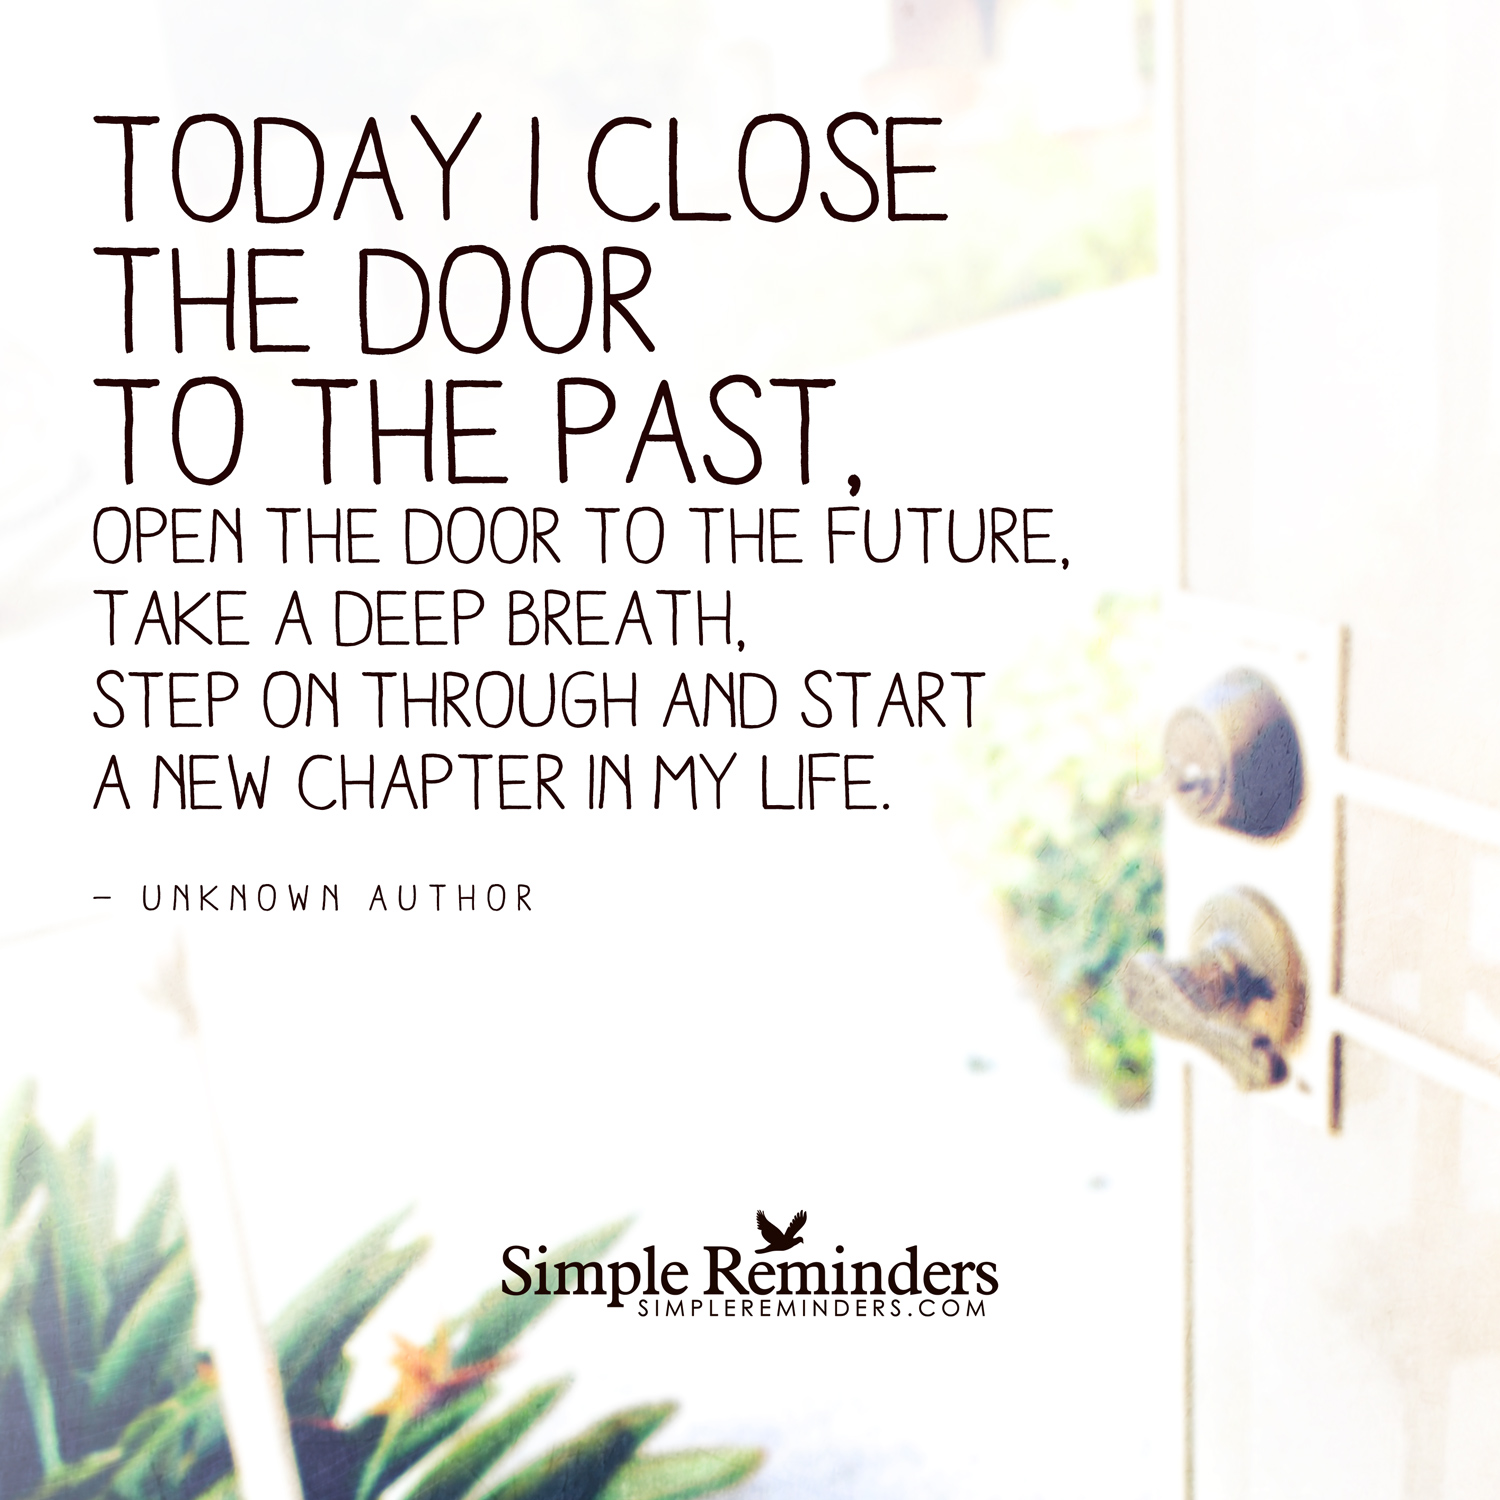 Open And Closed Doors Quotes. QuotesGram